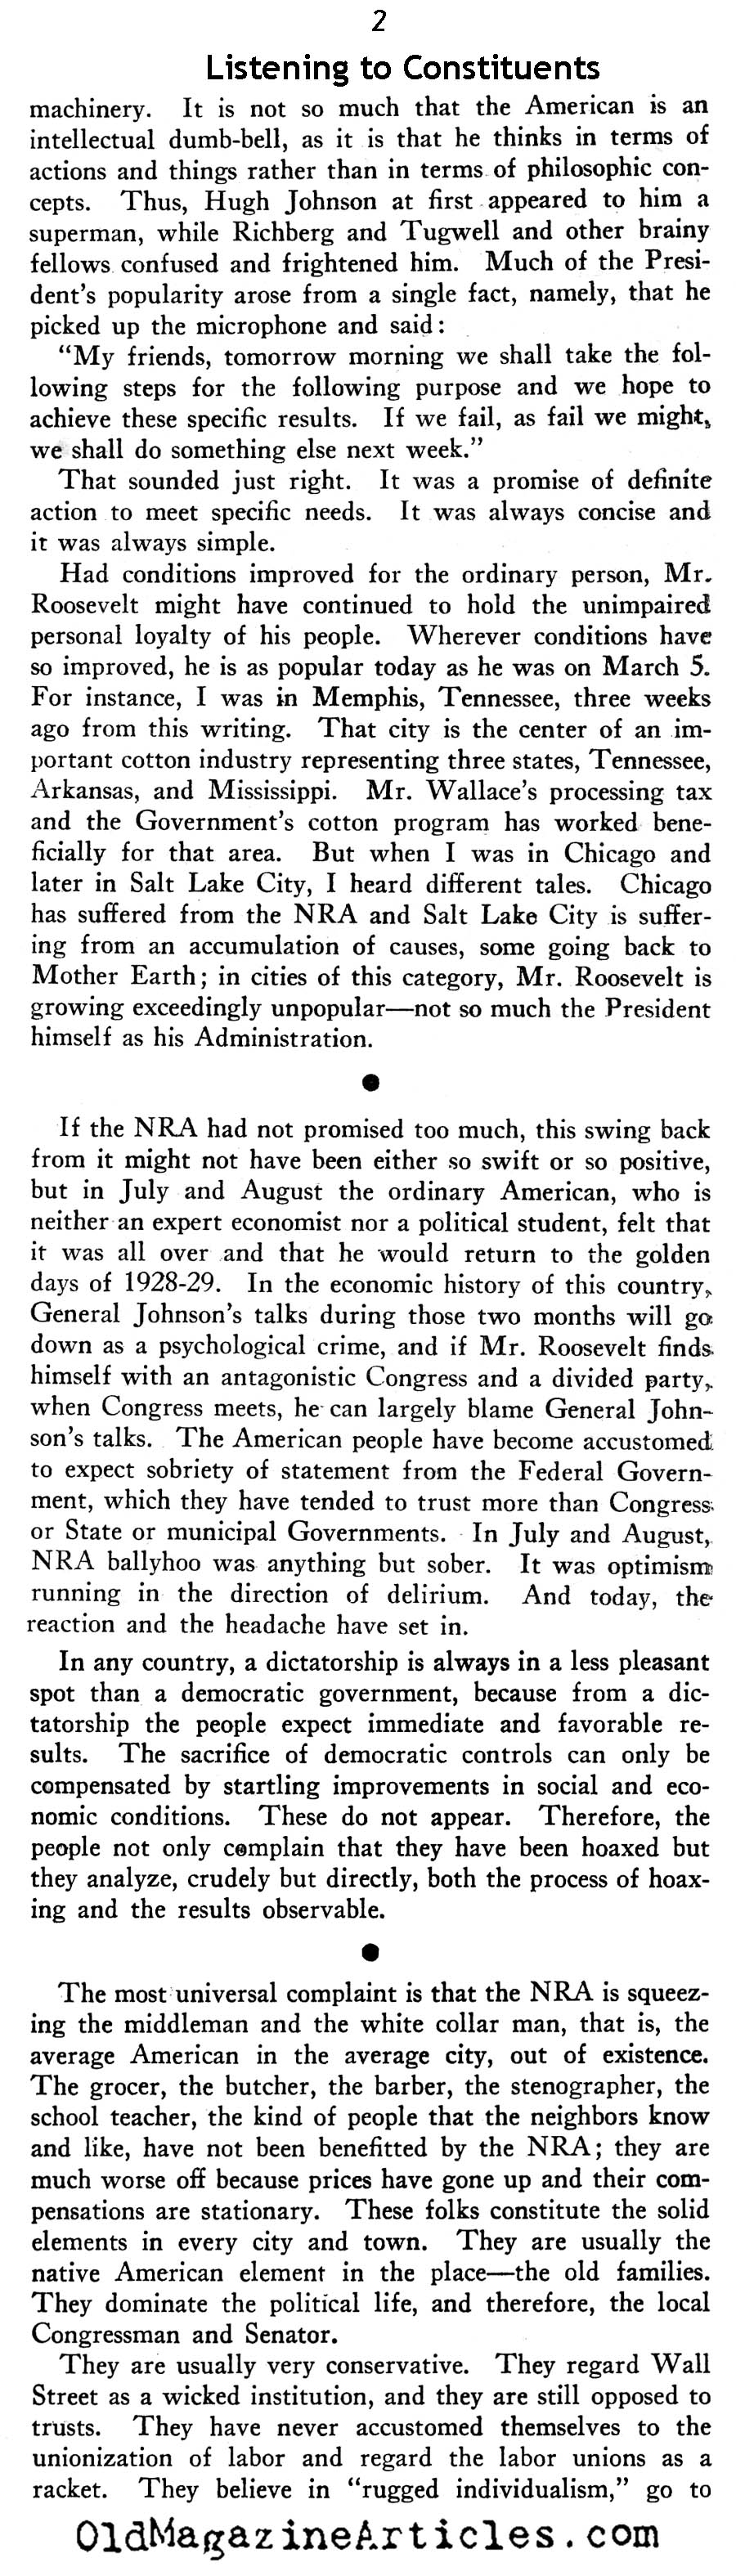 The Unhappy Constituents (New Outlook Magazine, 1933)